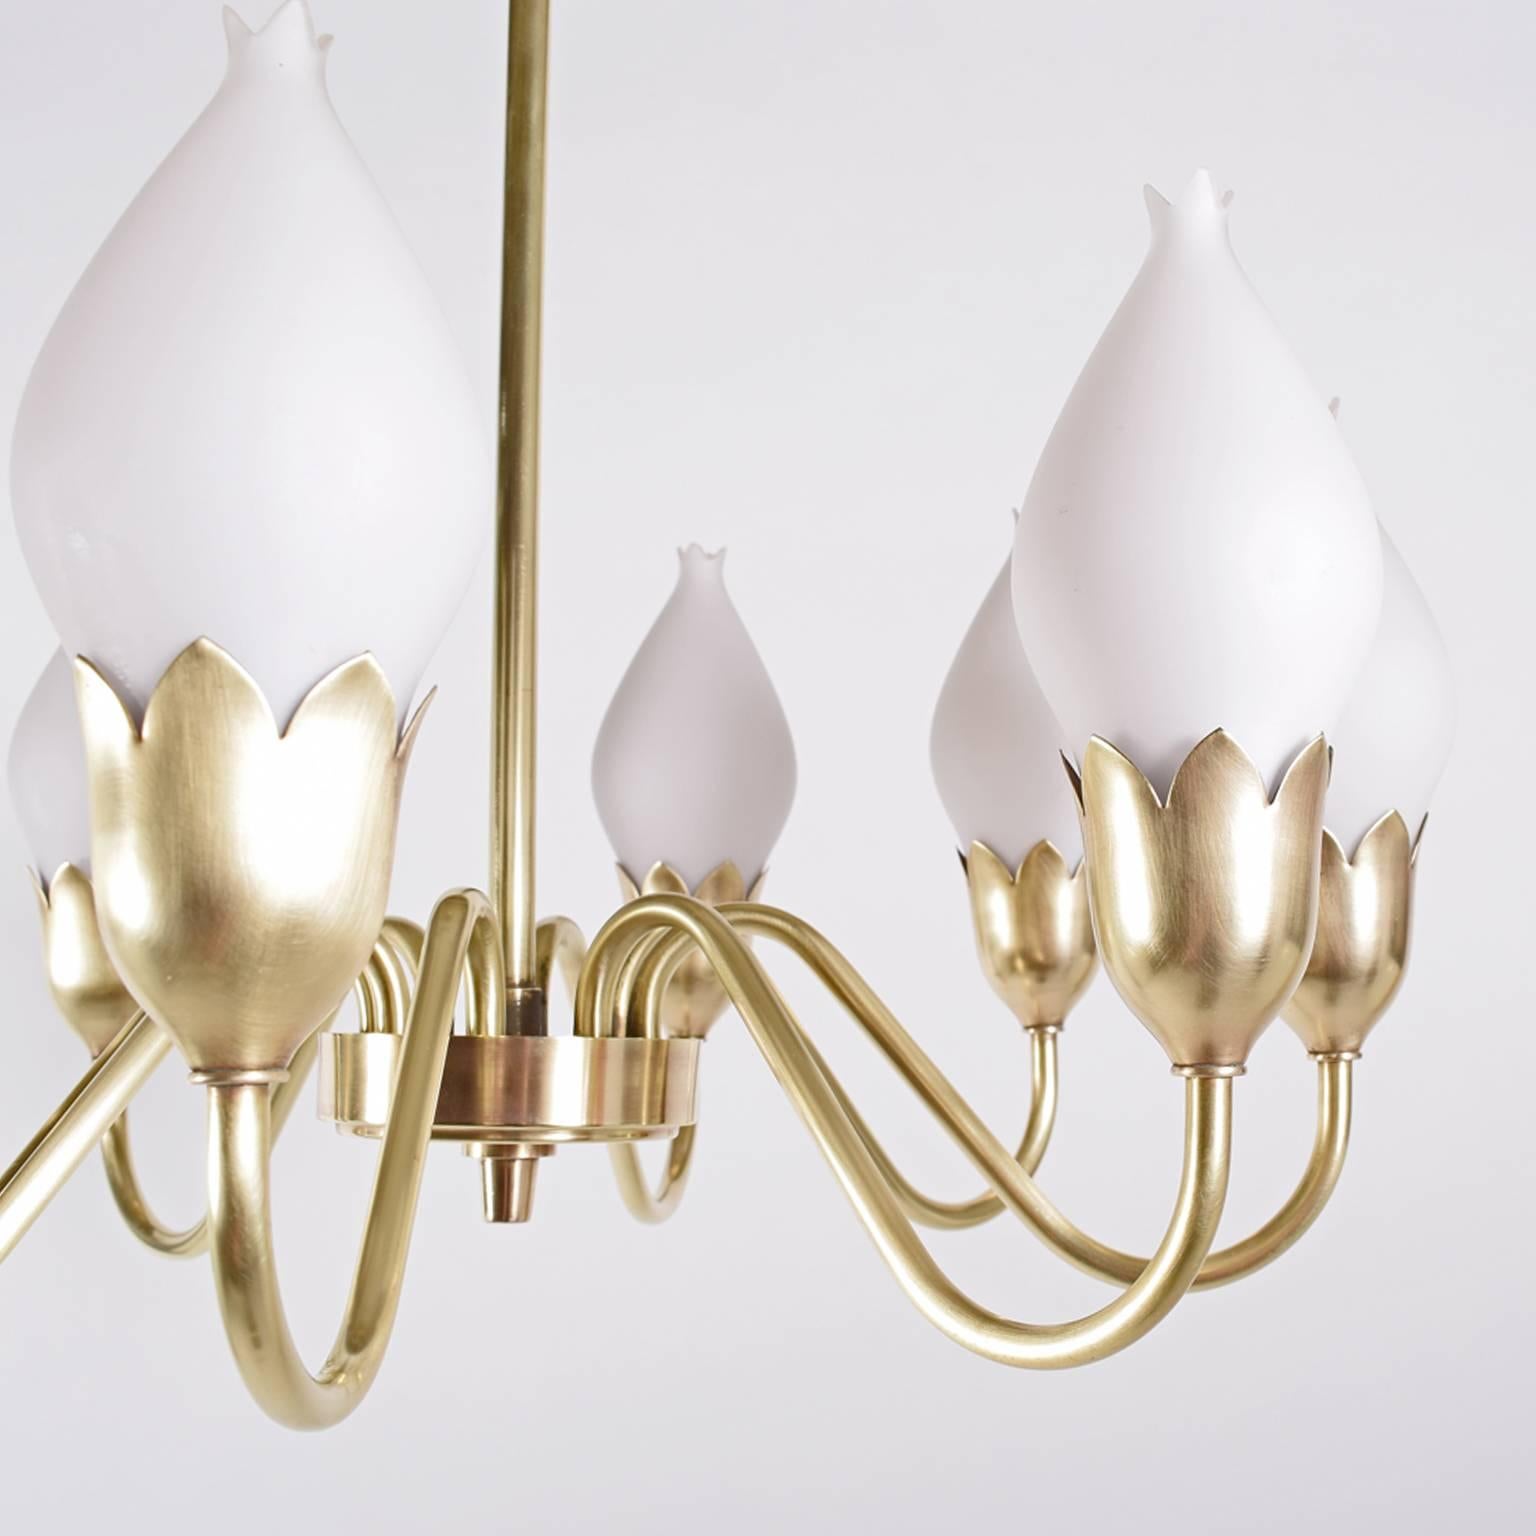 Signed Fog & Mørup. Solid brass chandelier with eight arms and opal glass.